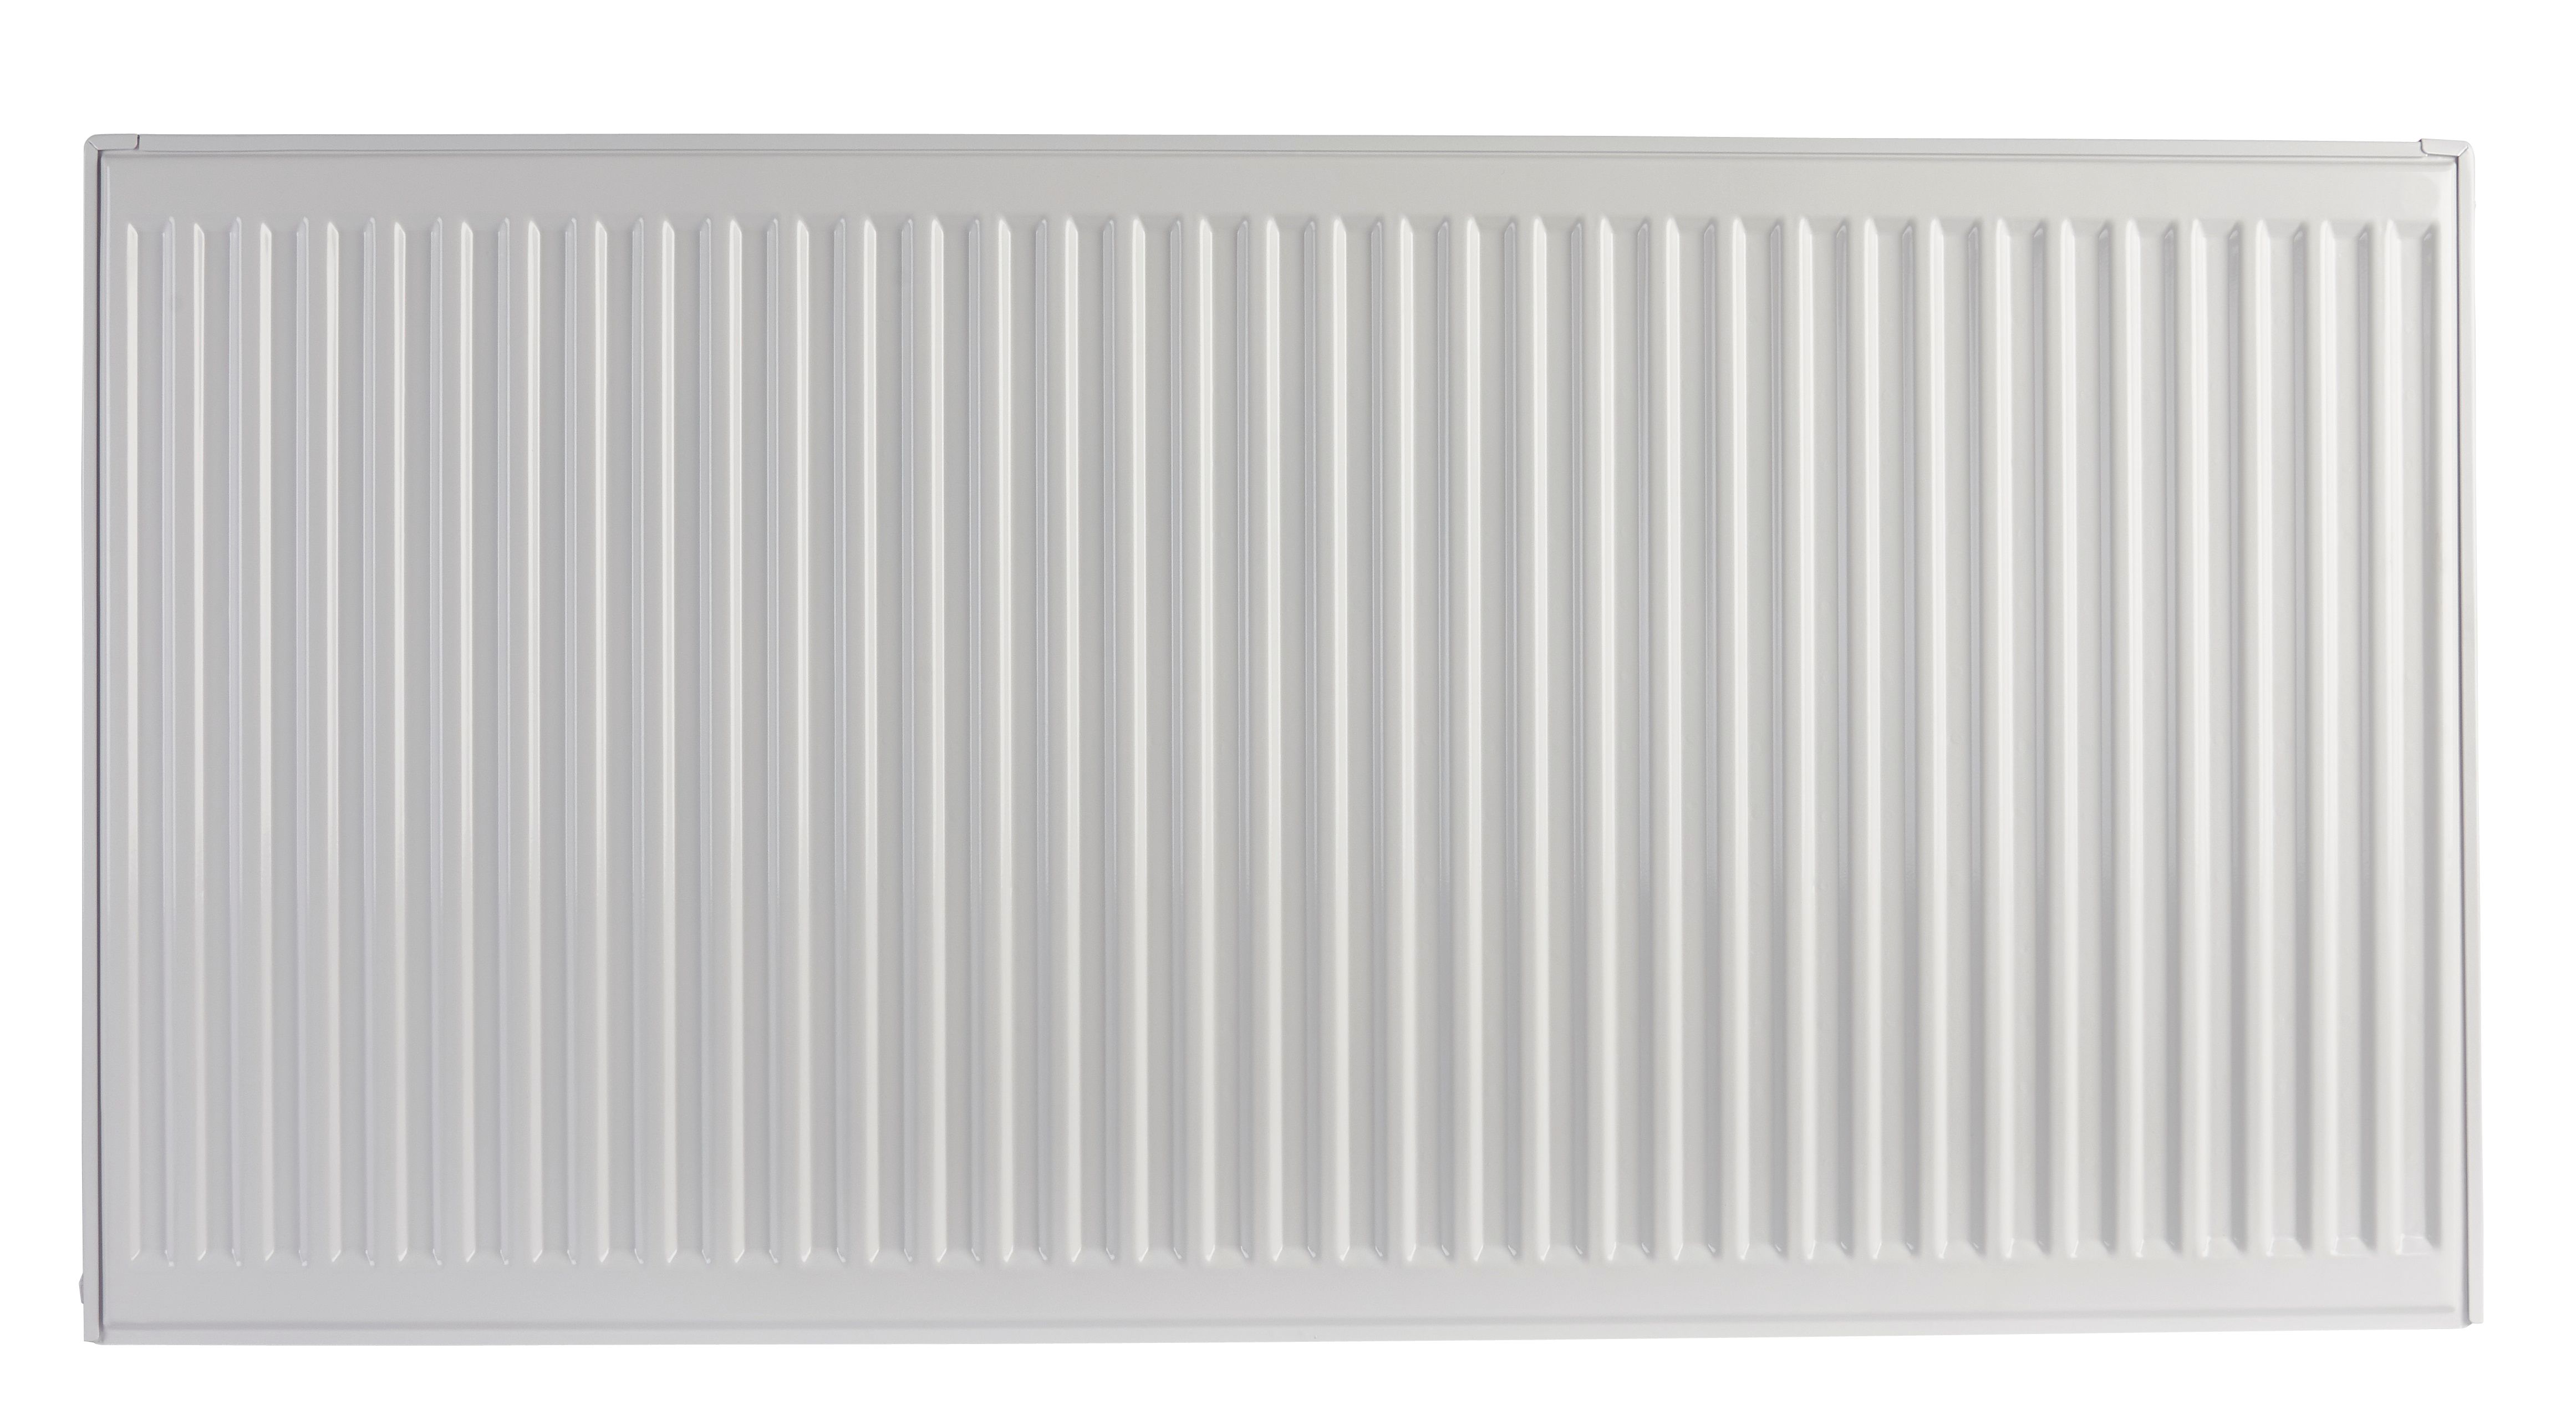 Homeline by Stelrad 700 x 1100mm Type 21 Double Panel Plus Single Convector Radiator